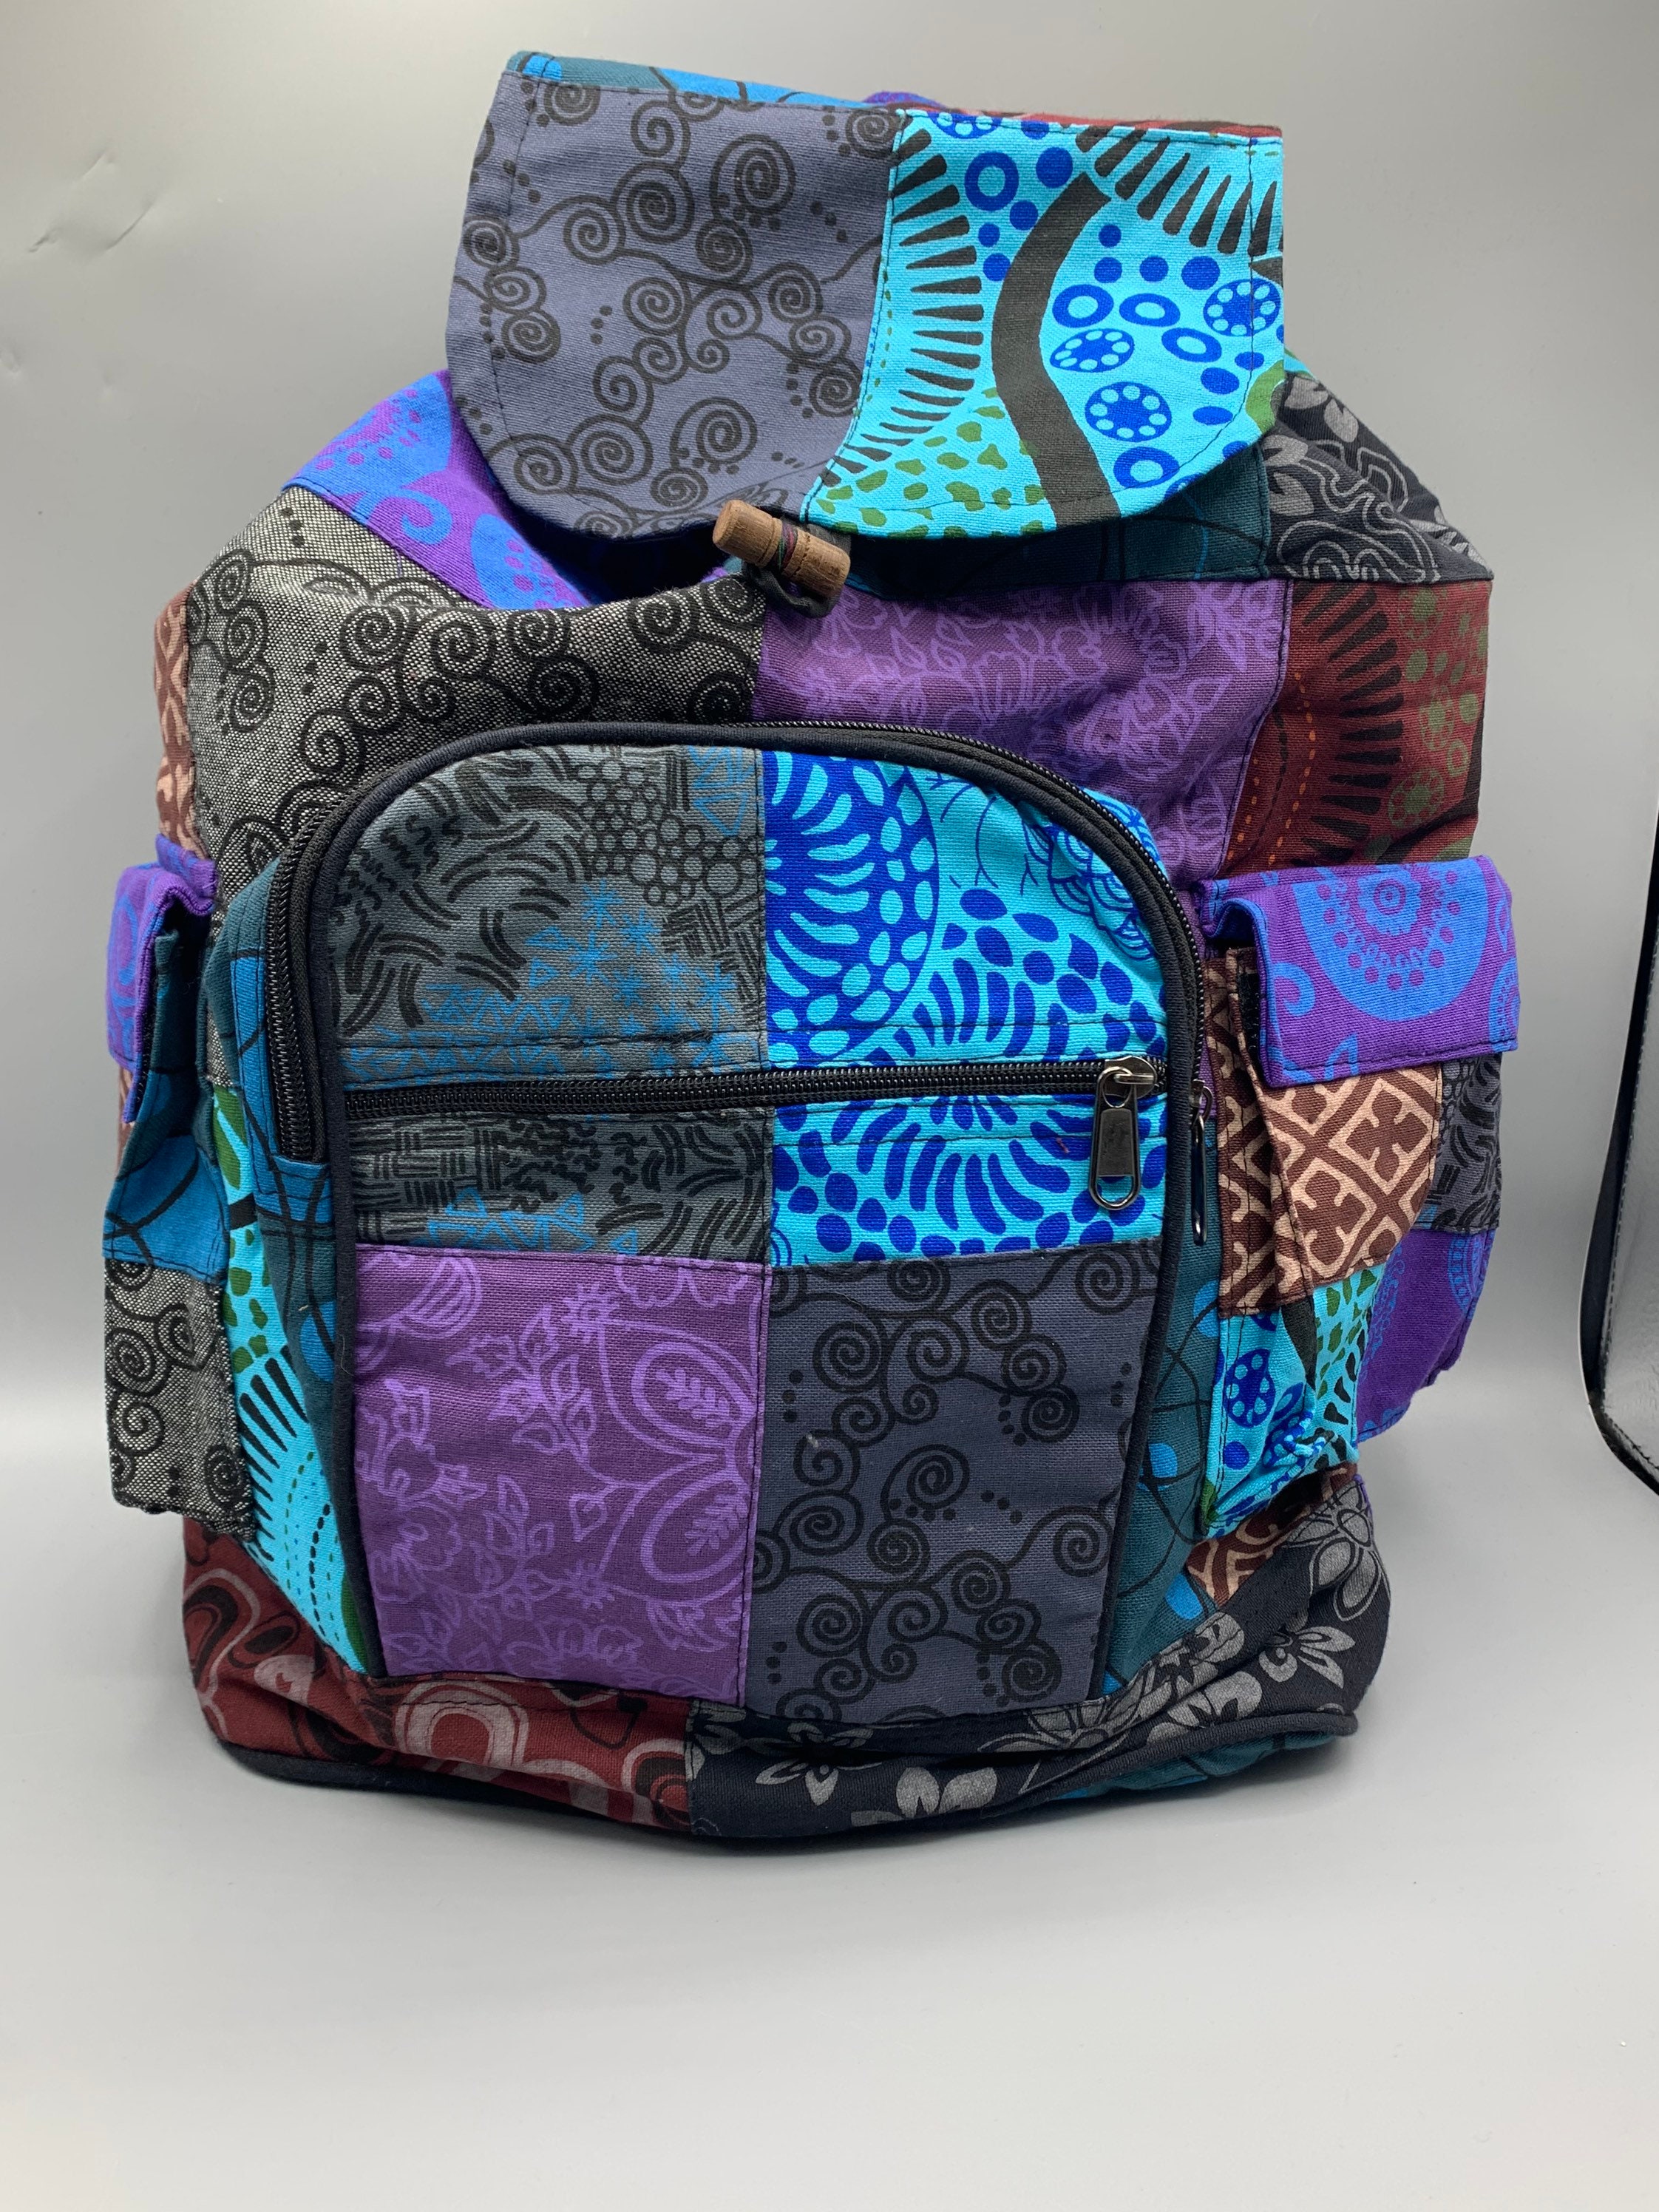 Cotton Stonewashed Peace Backpack Beach Travel Festival Hiking School  Rucksack Hippie Bag Yoga Purse Men's Women's Gift Gifts FAST SHIPPING 